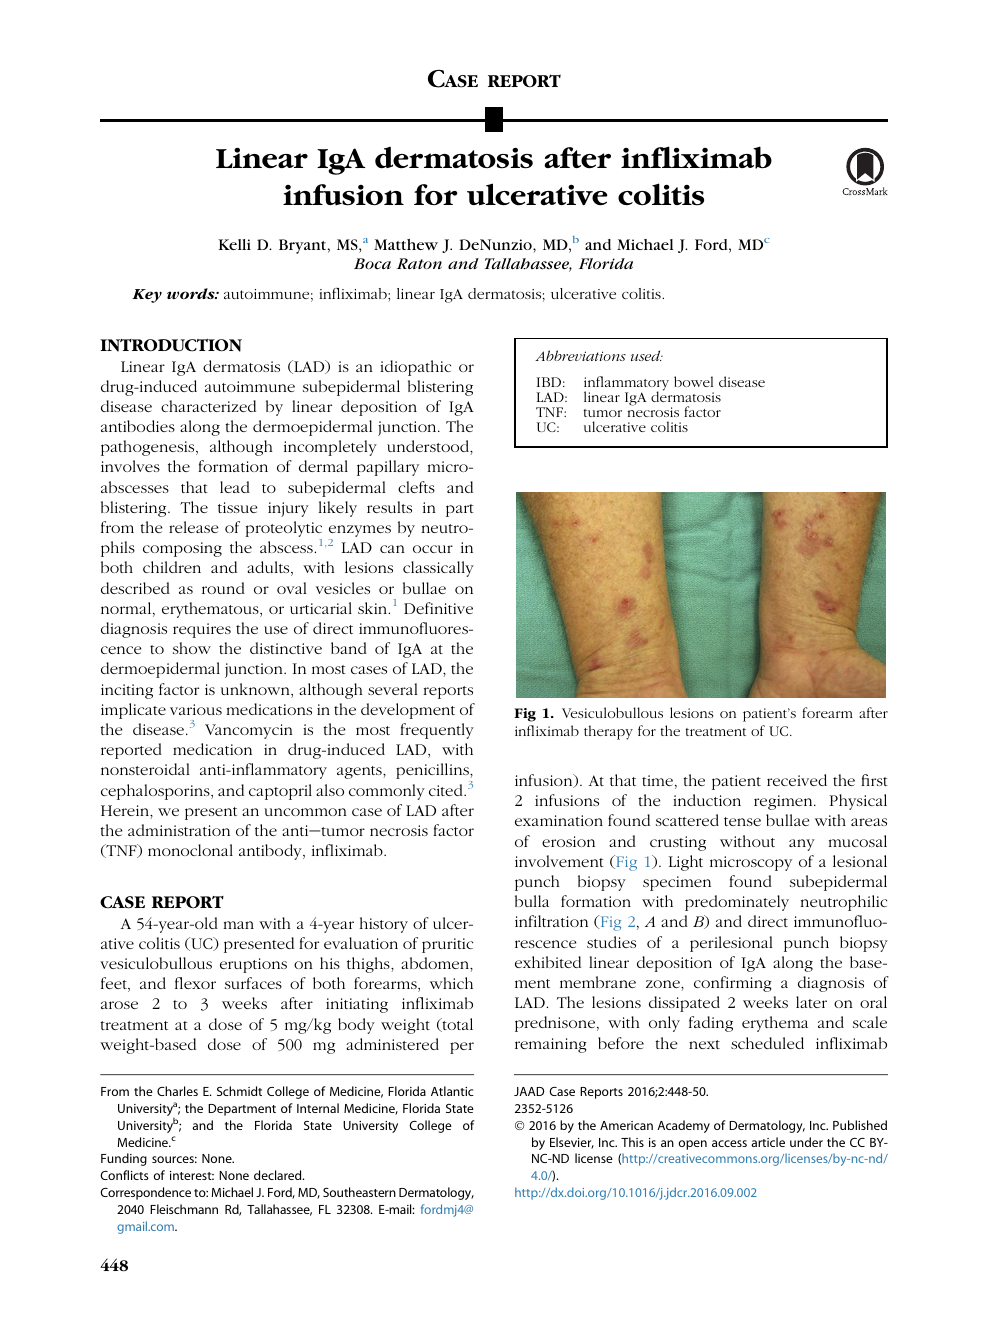 Linear Iga Dermatosis After Infliximab Infusion For Ulcerative Colitis Topic Of Research Paper In Clinical Medicine Download Scholarly Article Pdf And Read For Free On Cyberleninka Open Science Hub